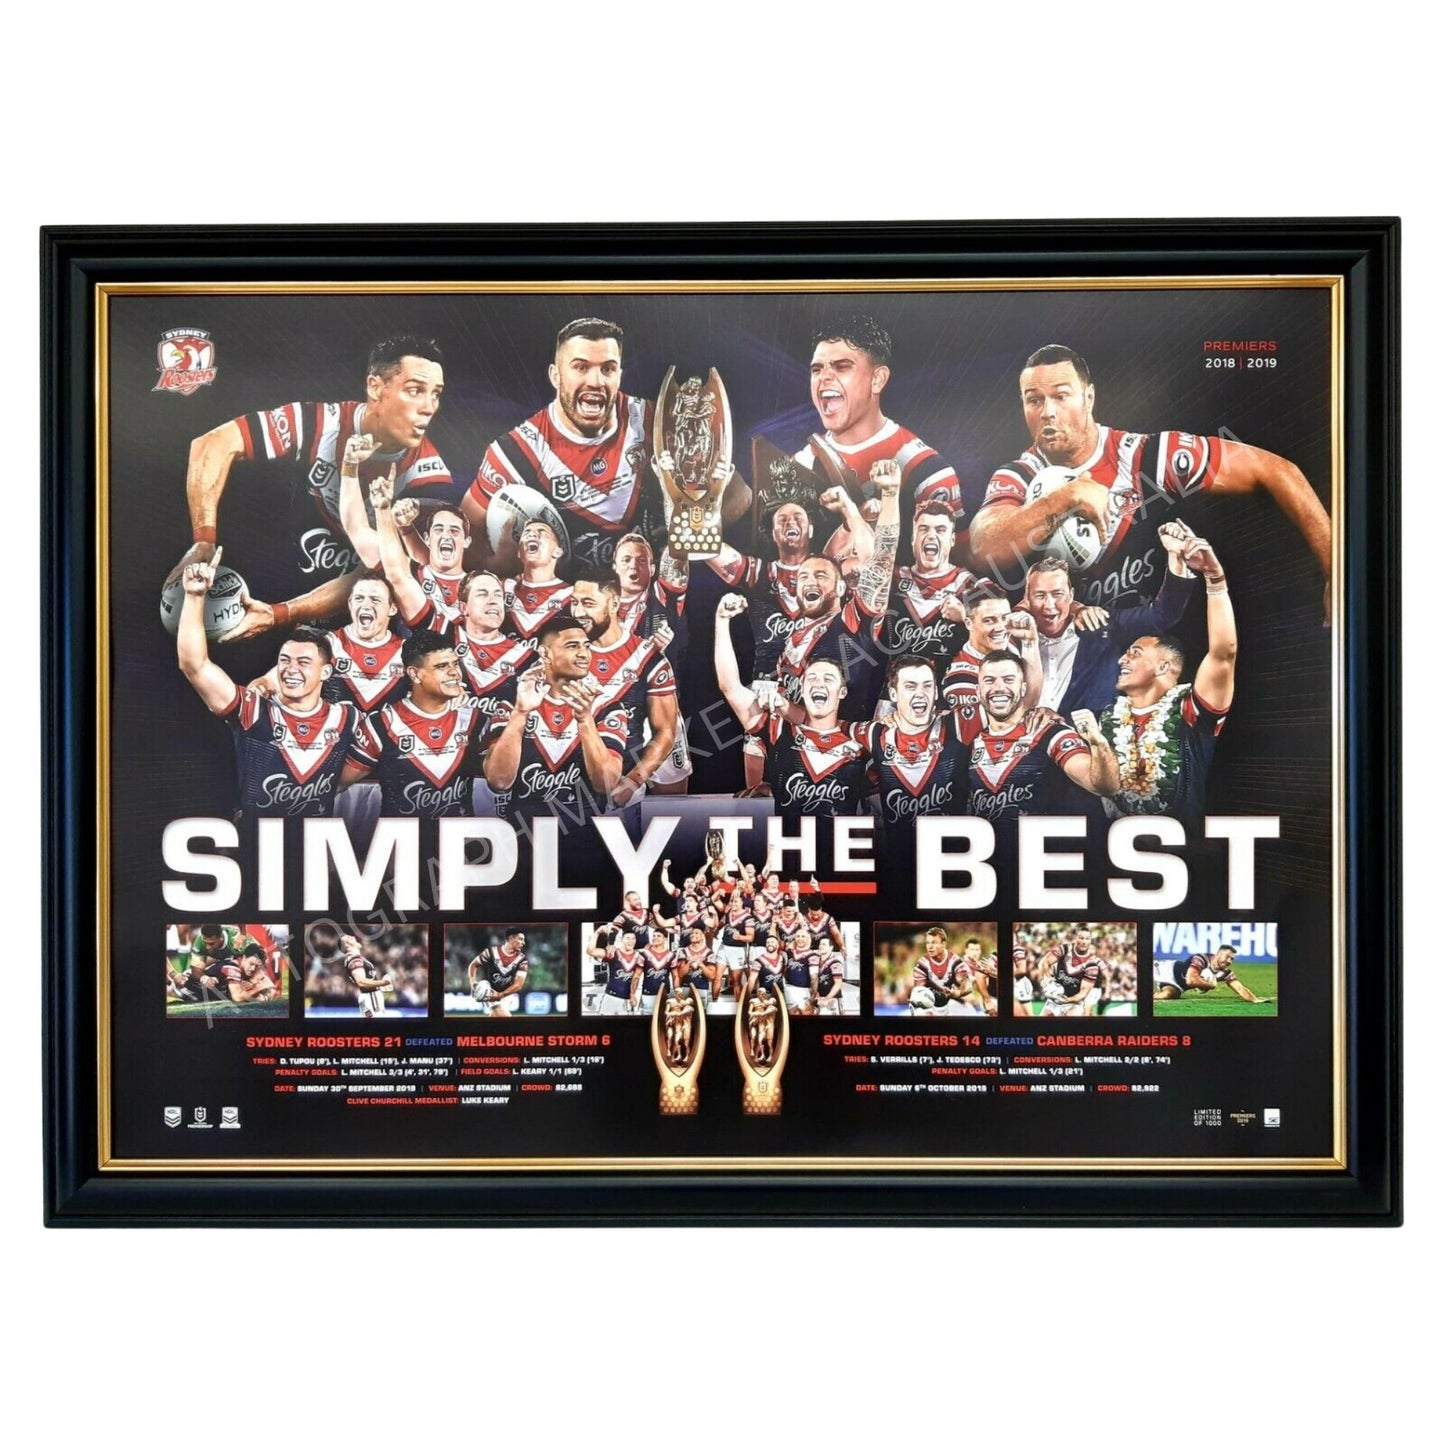 Sydney Roosters 2019 NRL PREMIERS Simply The Best Framed Limited Edition COA